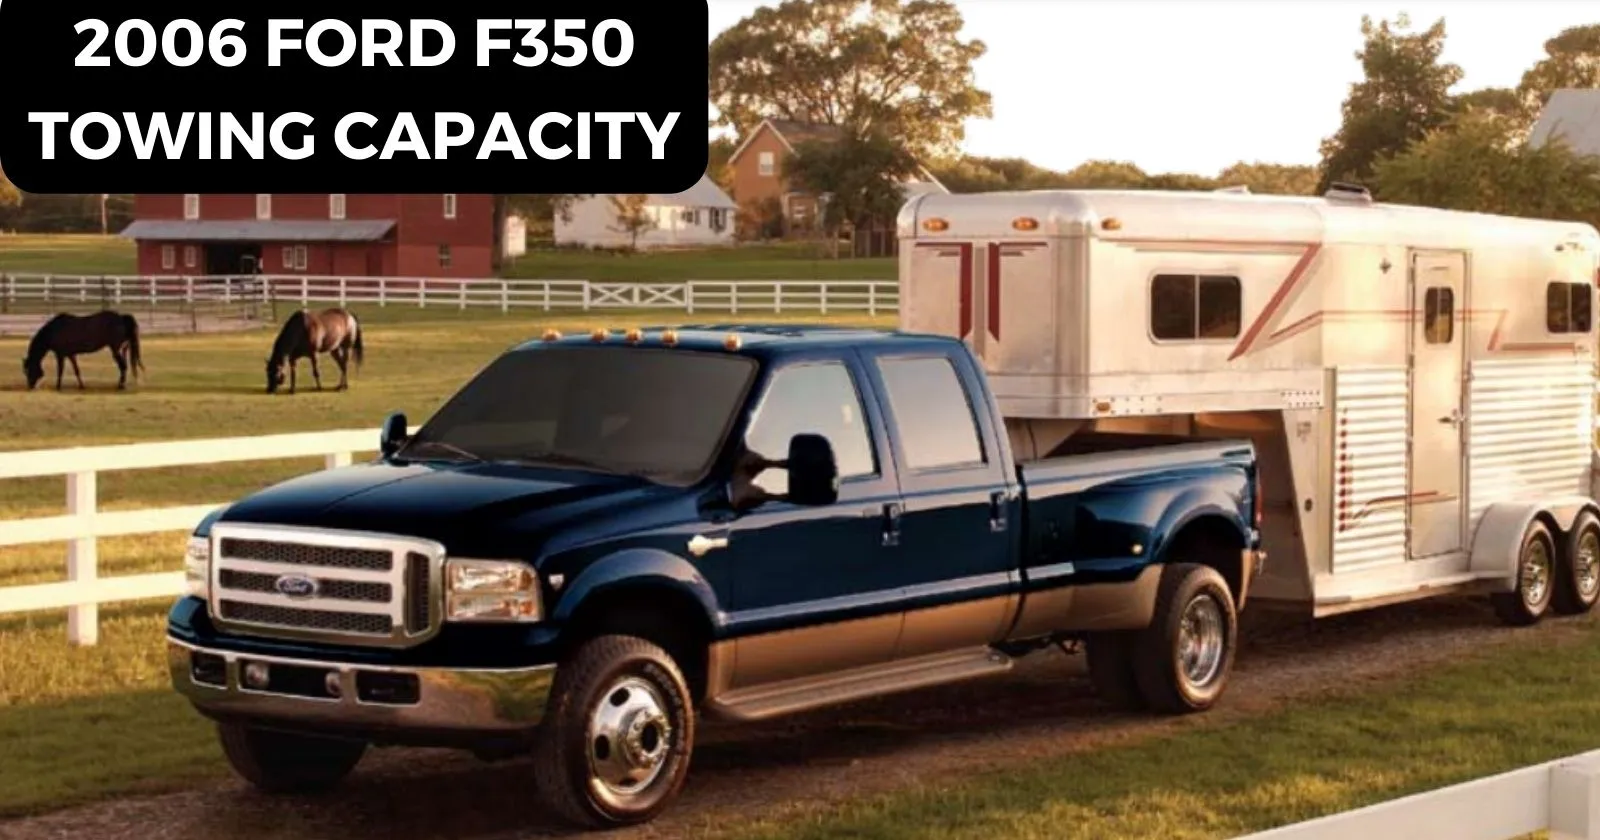 discover-2006-fordd-f350-towing-capacity-with-chart-thecartowing